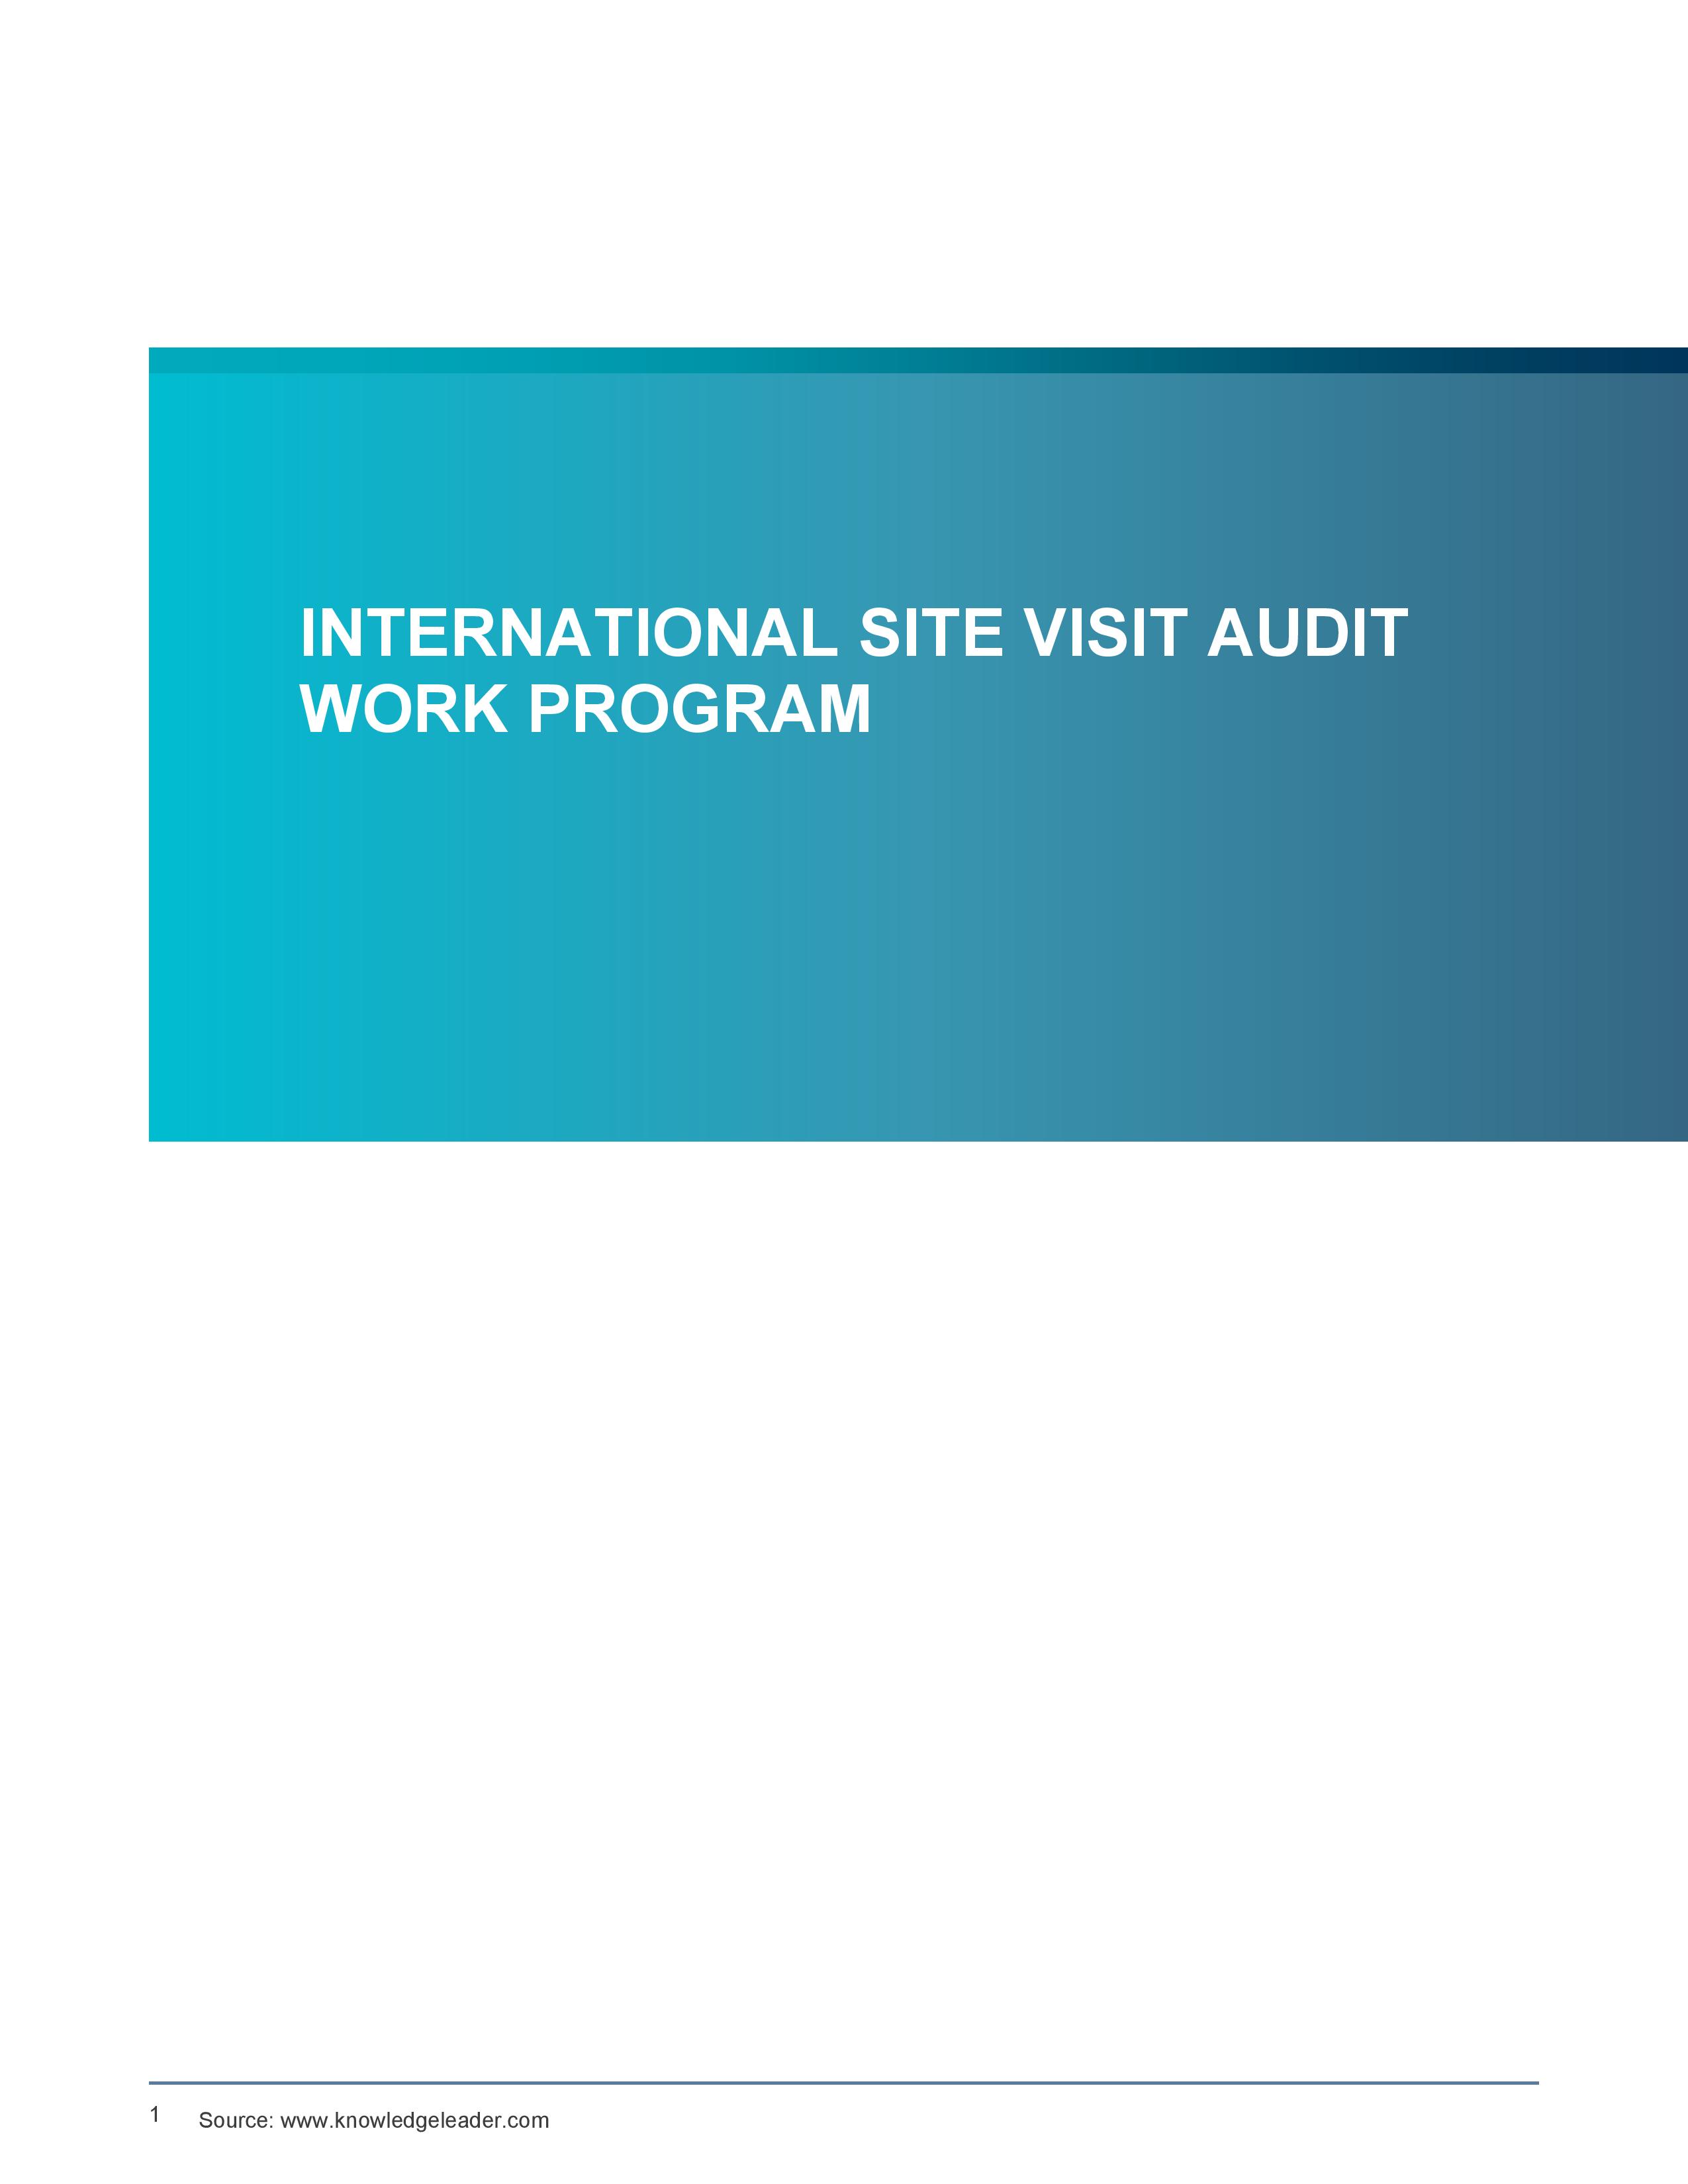 Screenshot of the First Page of International Site Visit Audit Work Program